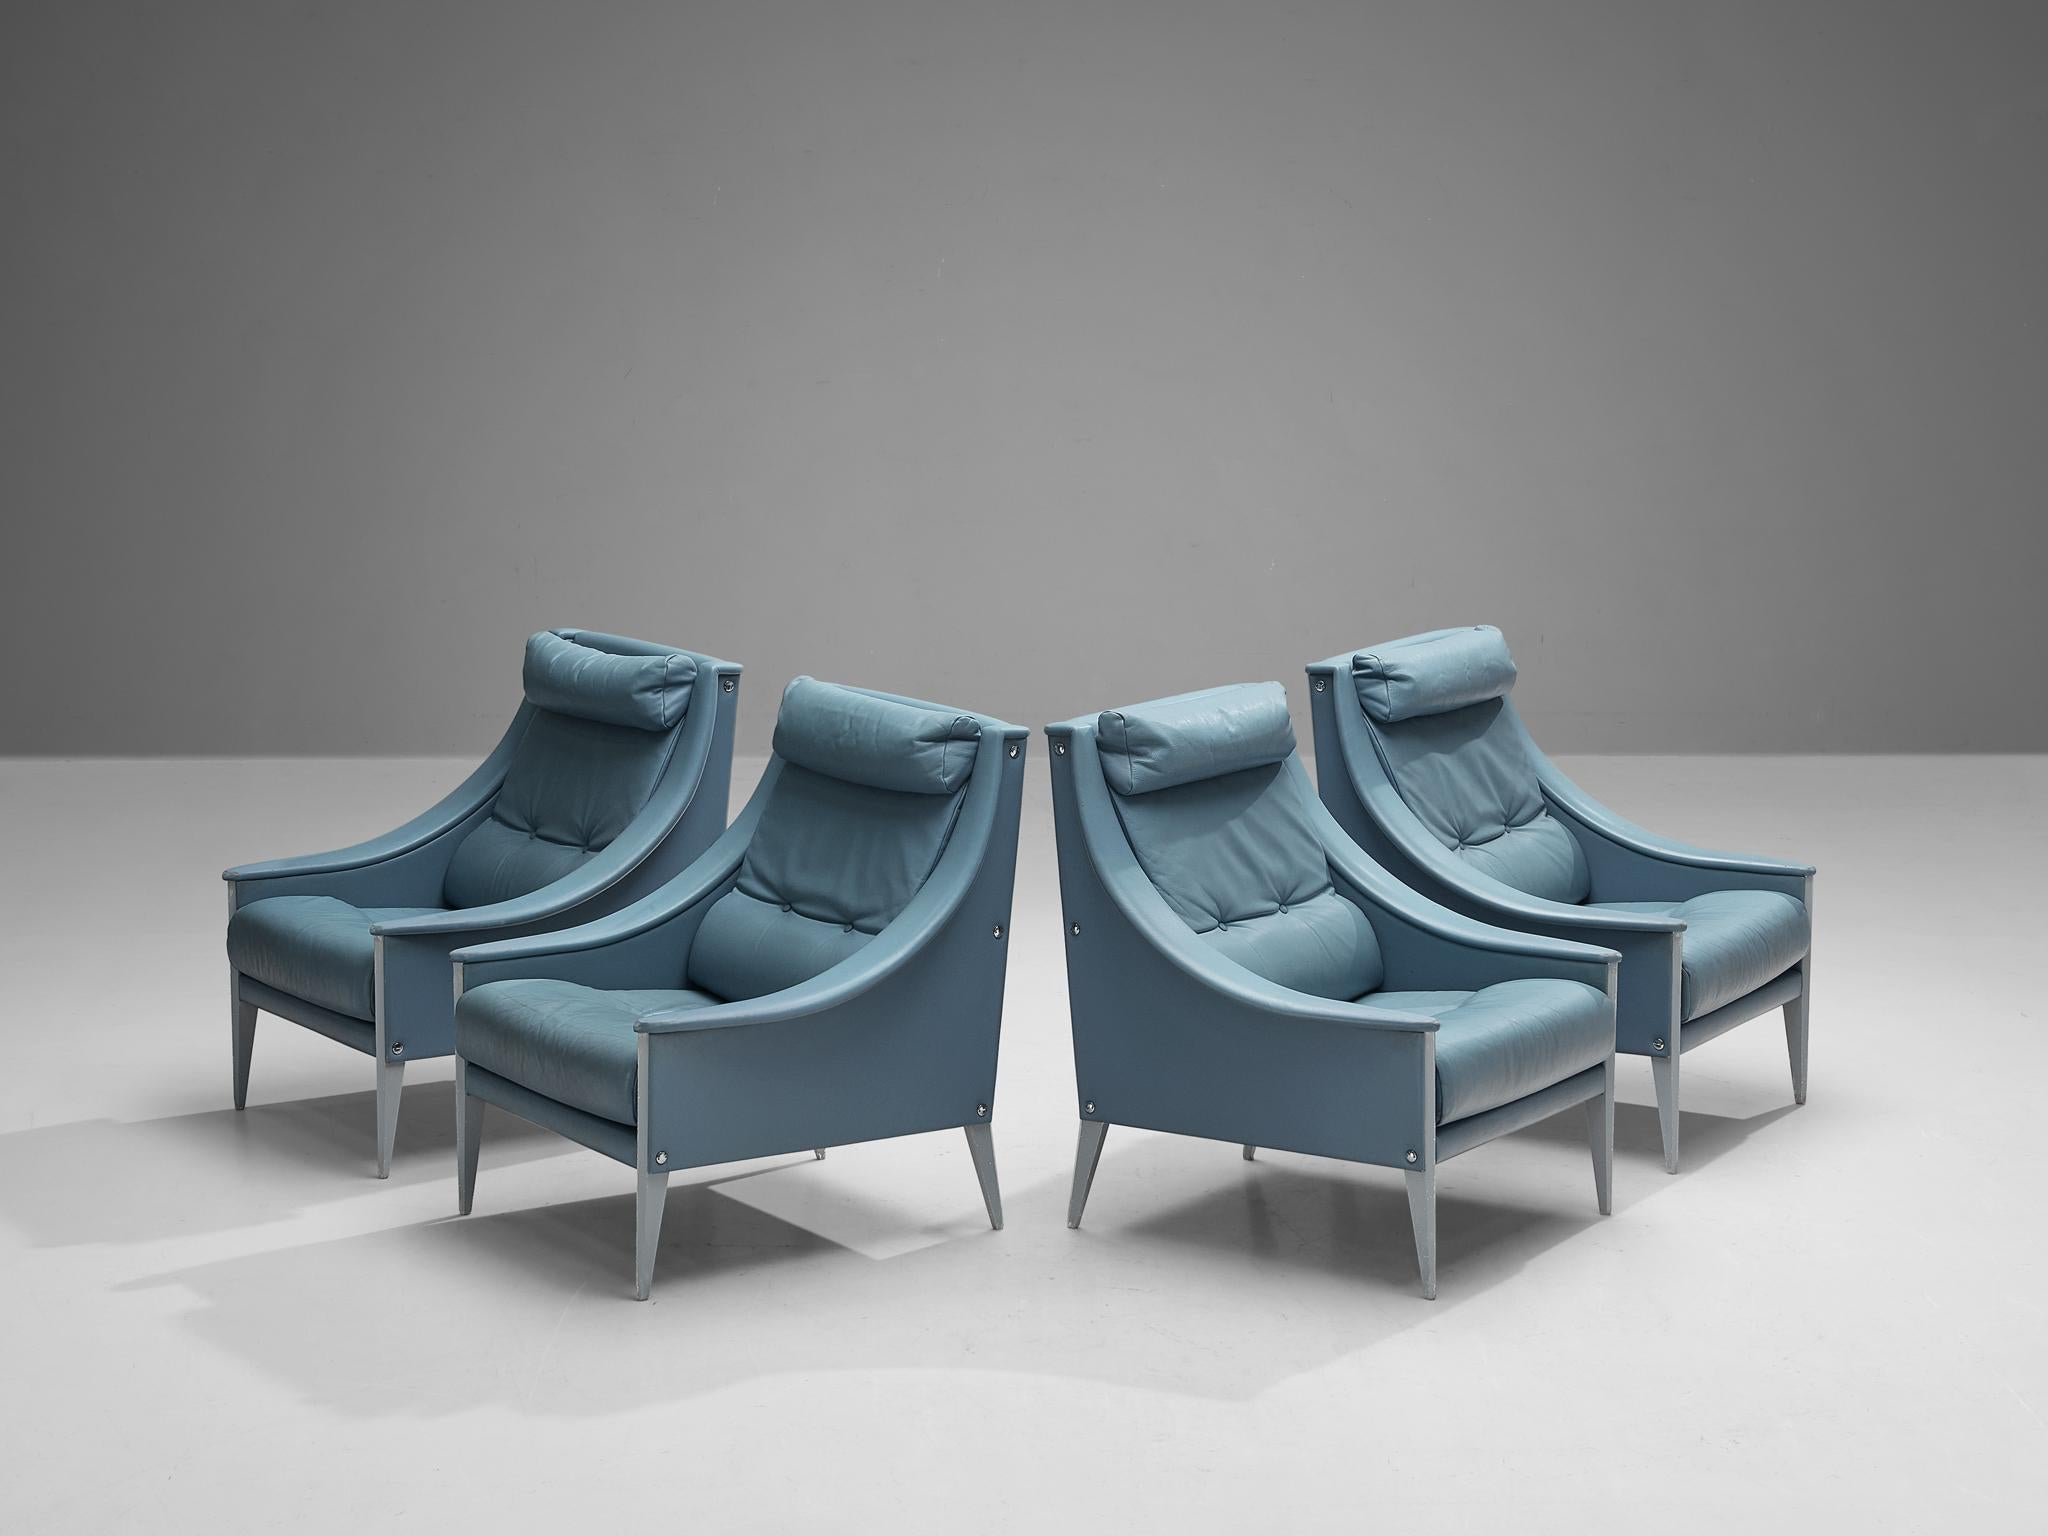 Gio Ponti for Poltrona Frau, lounge chairs, model ´Dezza´ nr. 48, leather, lacquered ash, metal, Italy, 1965. 

Set of four stylish lounge chairs designed by Gio Ponti for Poltrona Frau. These chairs embody some of Ponti’s most important design